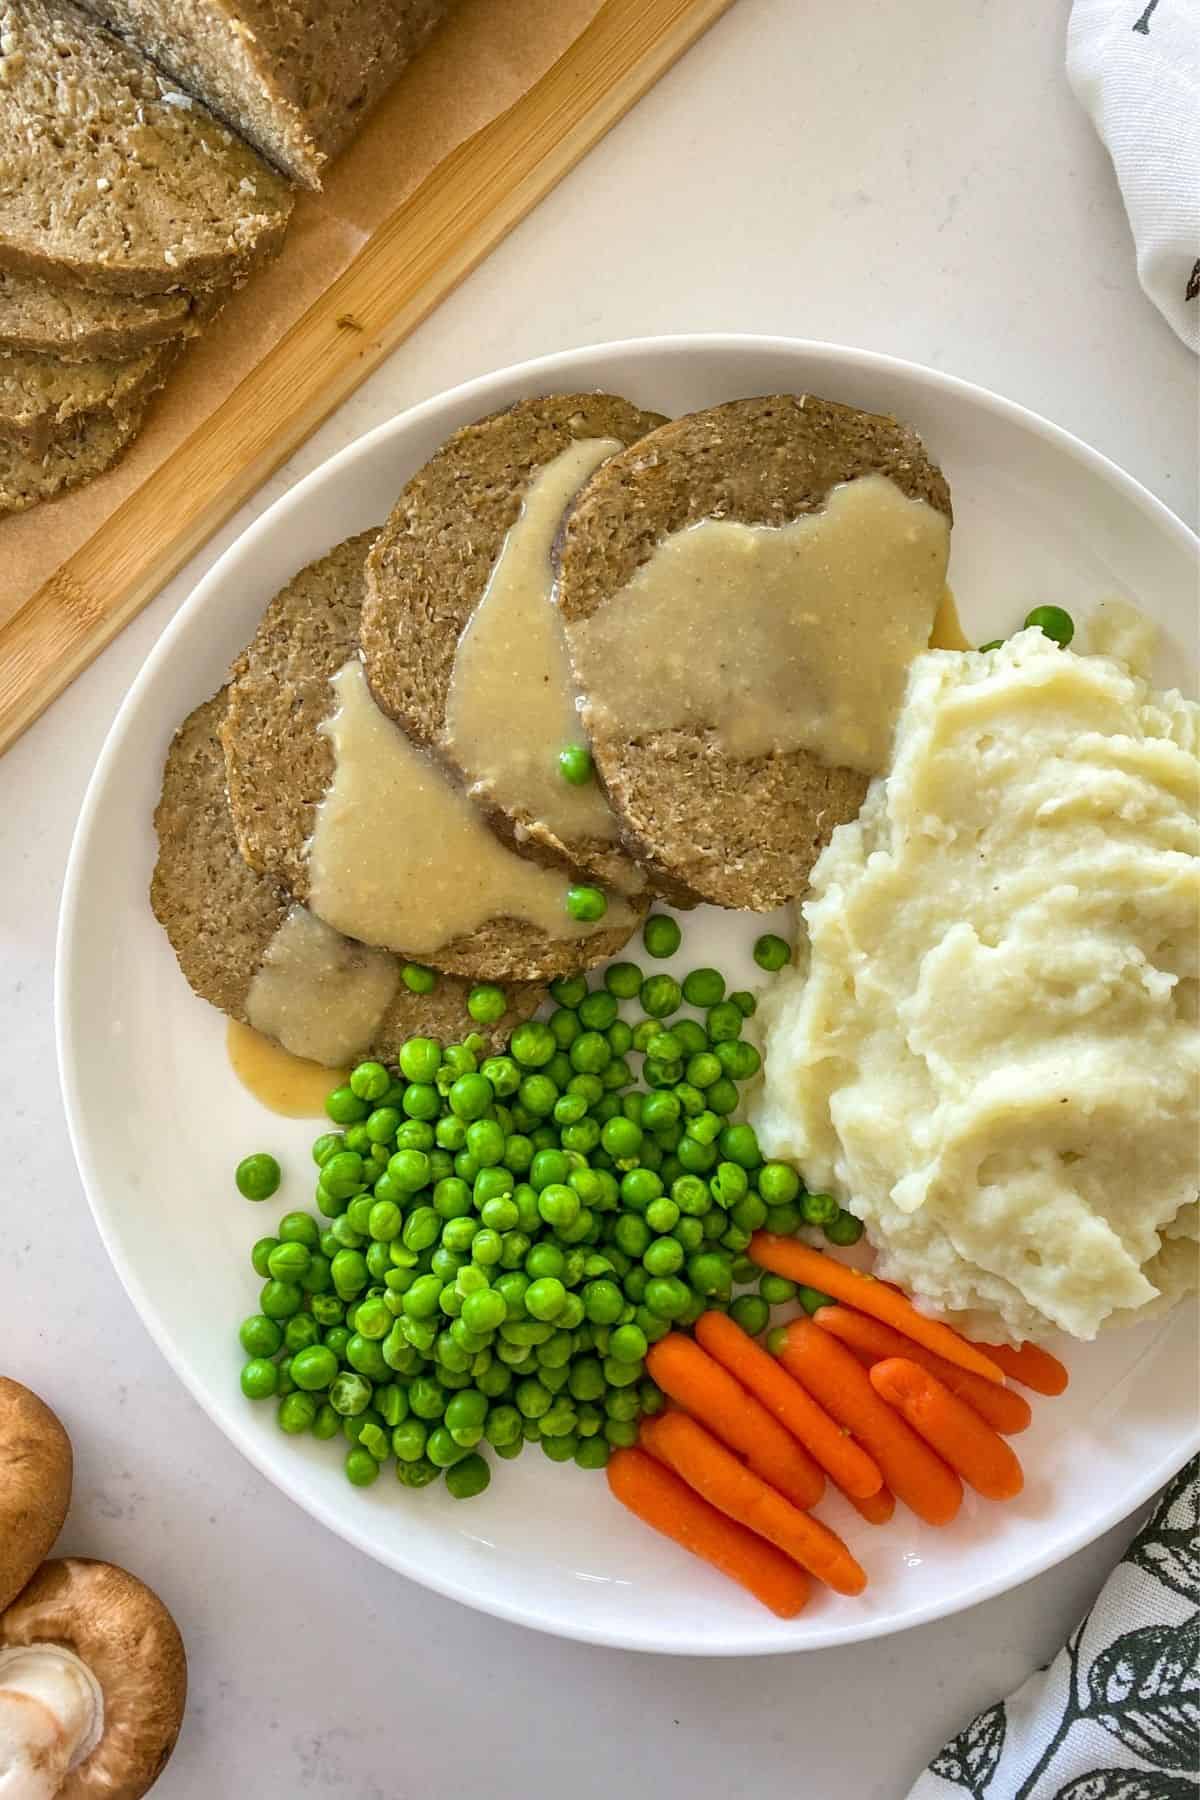 Sliced roast with gravy on top and peas, carrots and mashed potatoes beside it.